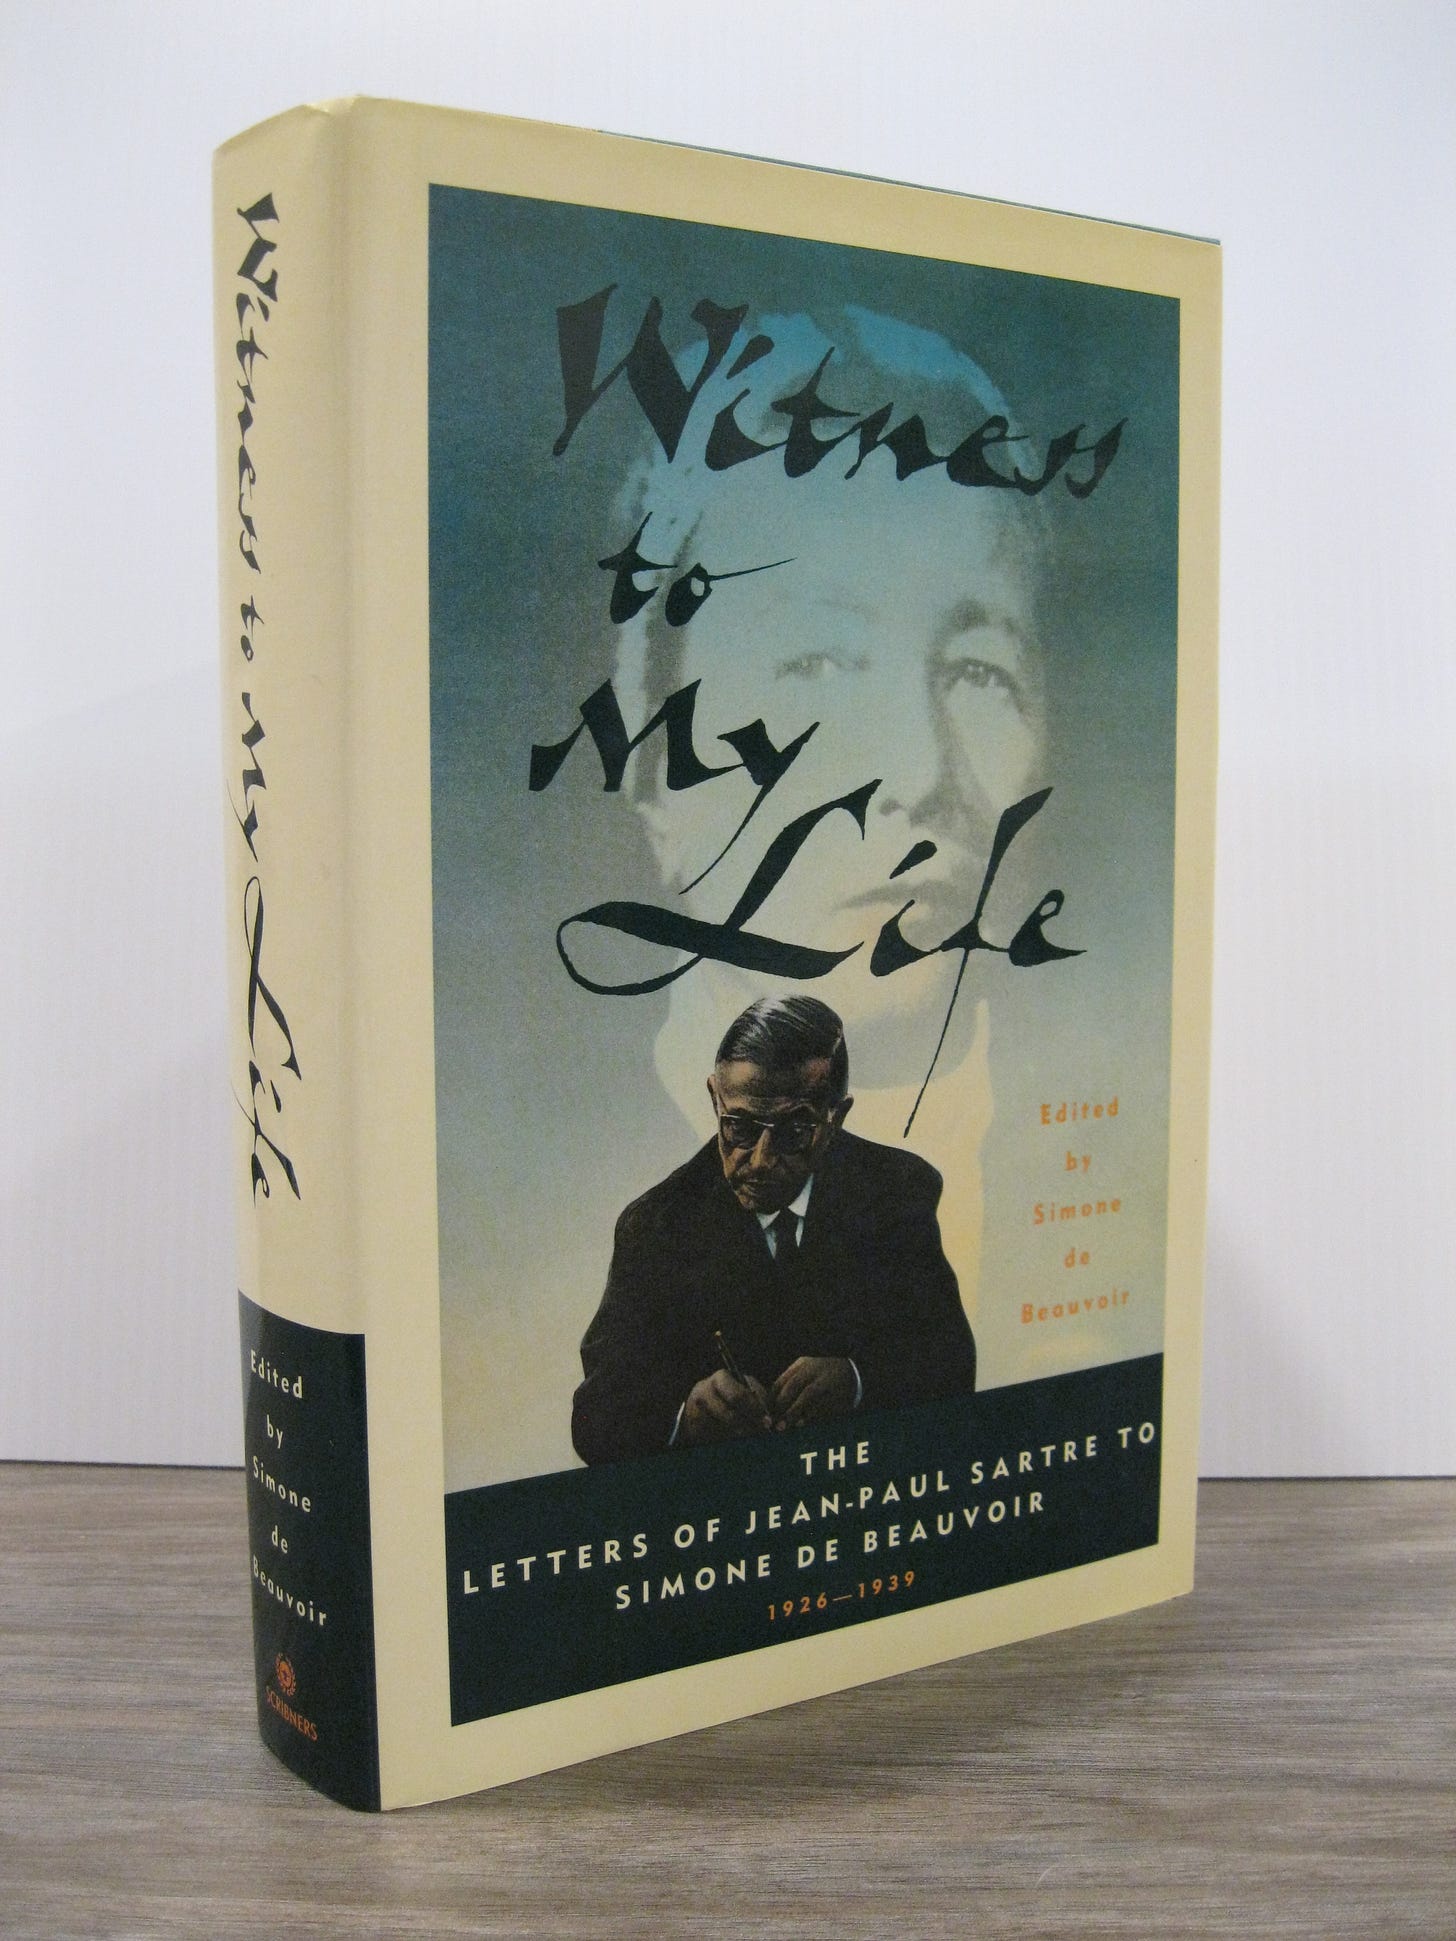 WITNESS TO MY LIFE: THE LETTERS OF JEAN-PAUL SARTRE TO SIMONE DE BEAUVOIR  1926 - 1939 by DE BEAUVOIR, SIMONE (Editor): Near Fine Hardcover (1992) 1st  Edition | MAPLE RIDGE BOOKS